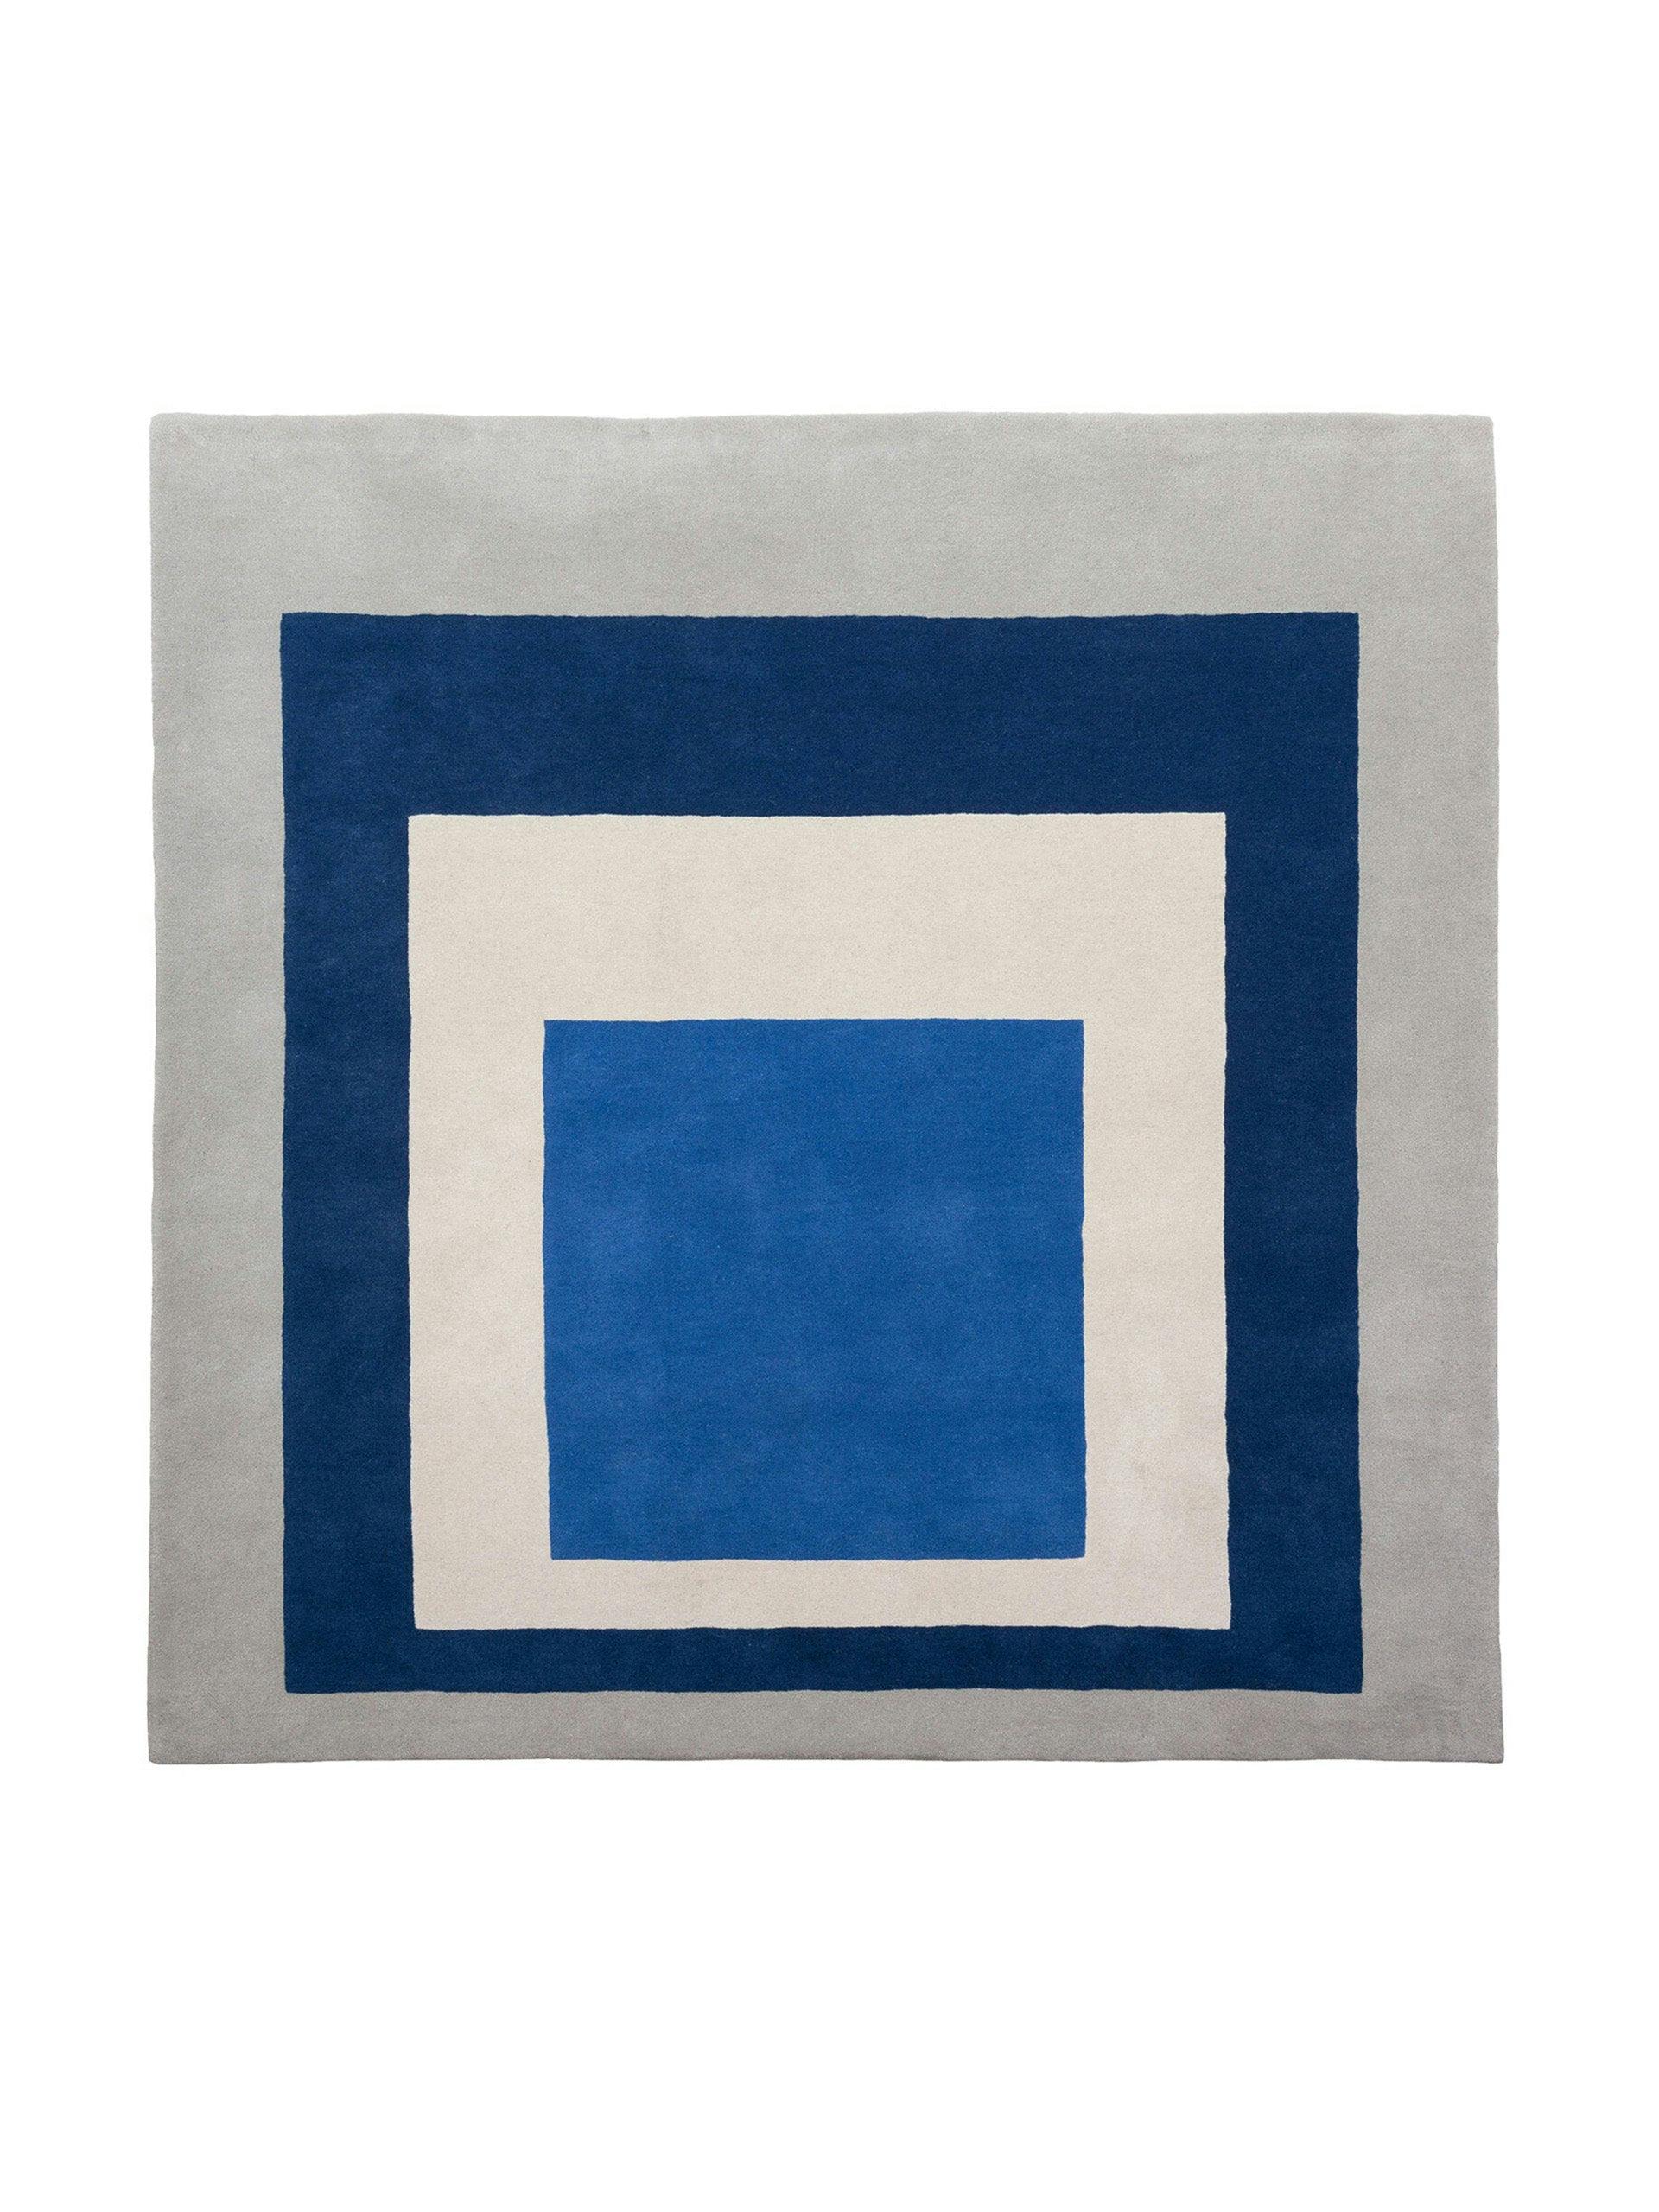 Homage to the Square by Josef Albers -  1.75 x 1.75m